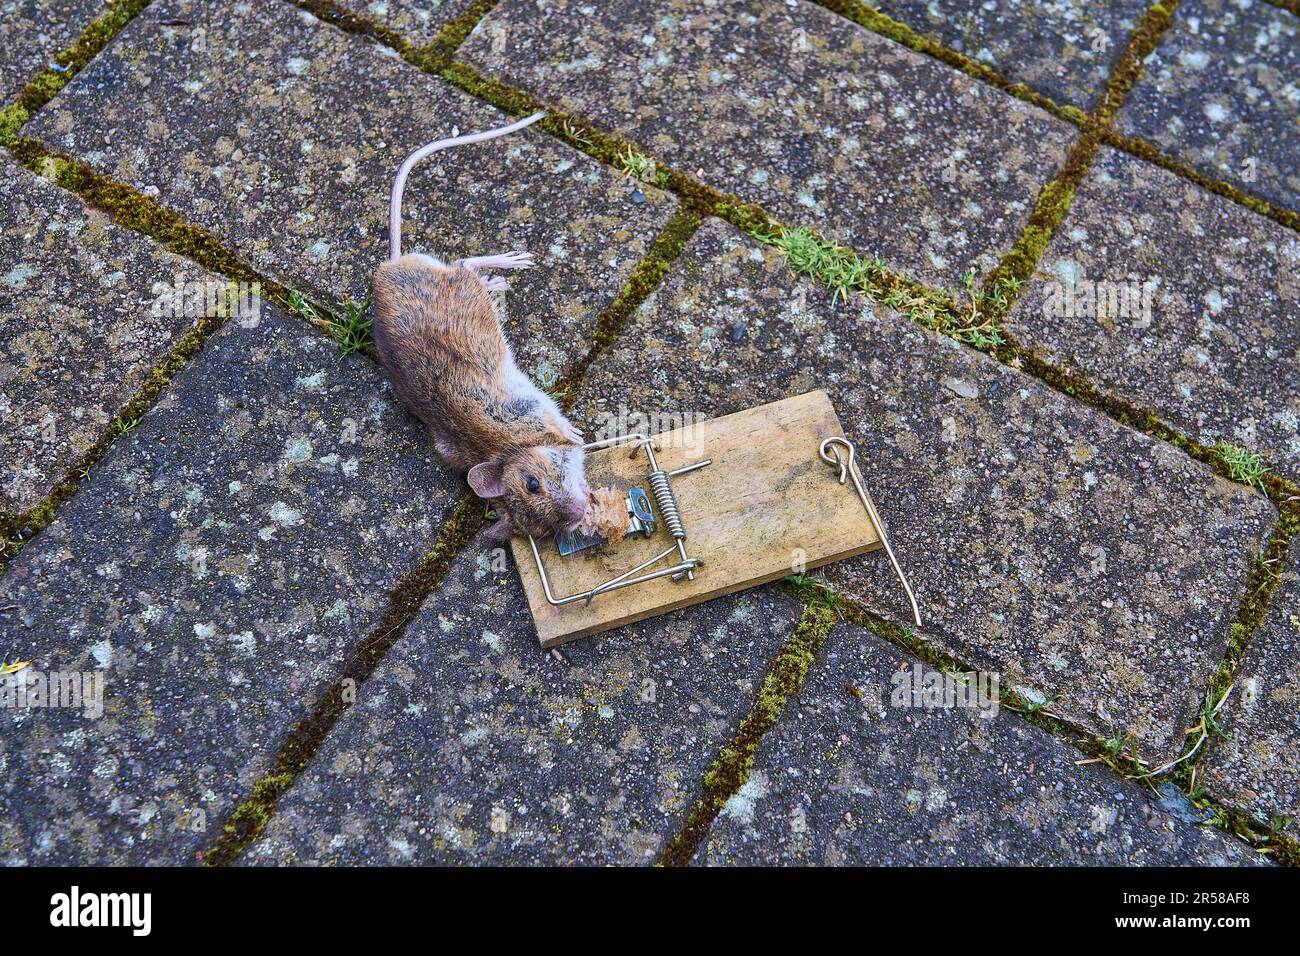 https://c8.alamy.com/comp/2R58AF8/close-up-of-small-bank-vole-mouse-dead-in-an-old-wooden-snap-trap-know-to-often-carry-and-transmit-the-hunta-virus-which-is-a-dangerous-disease-for-2R58AF8.jpg